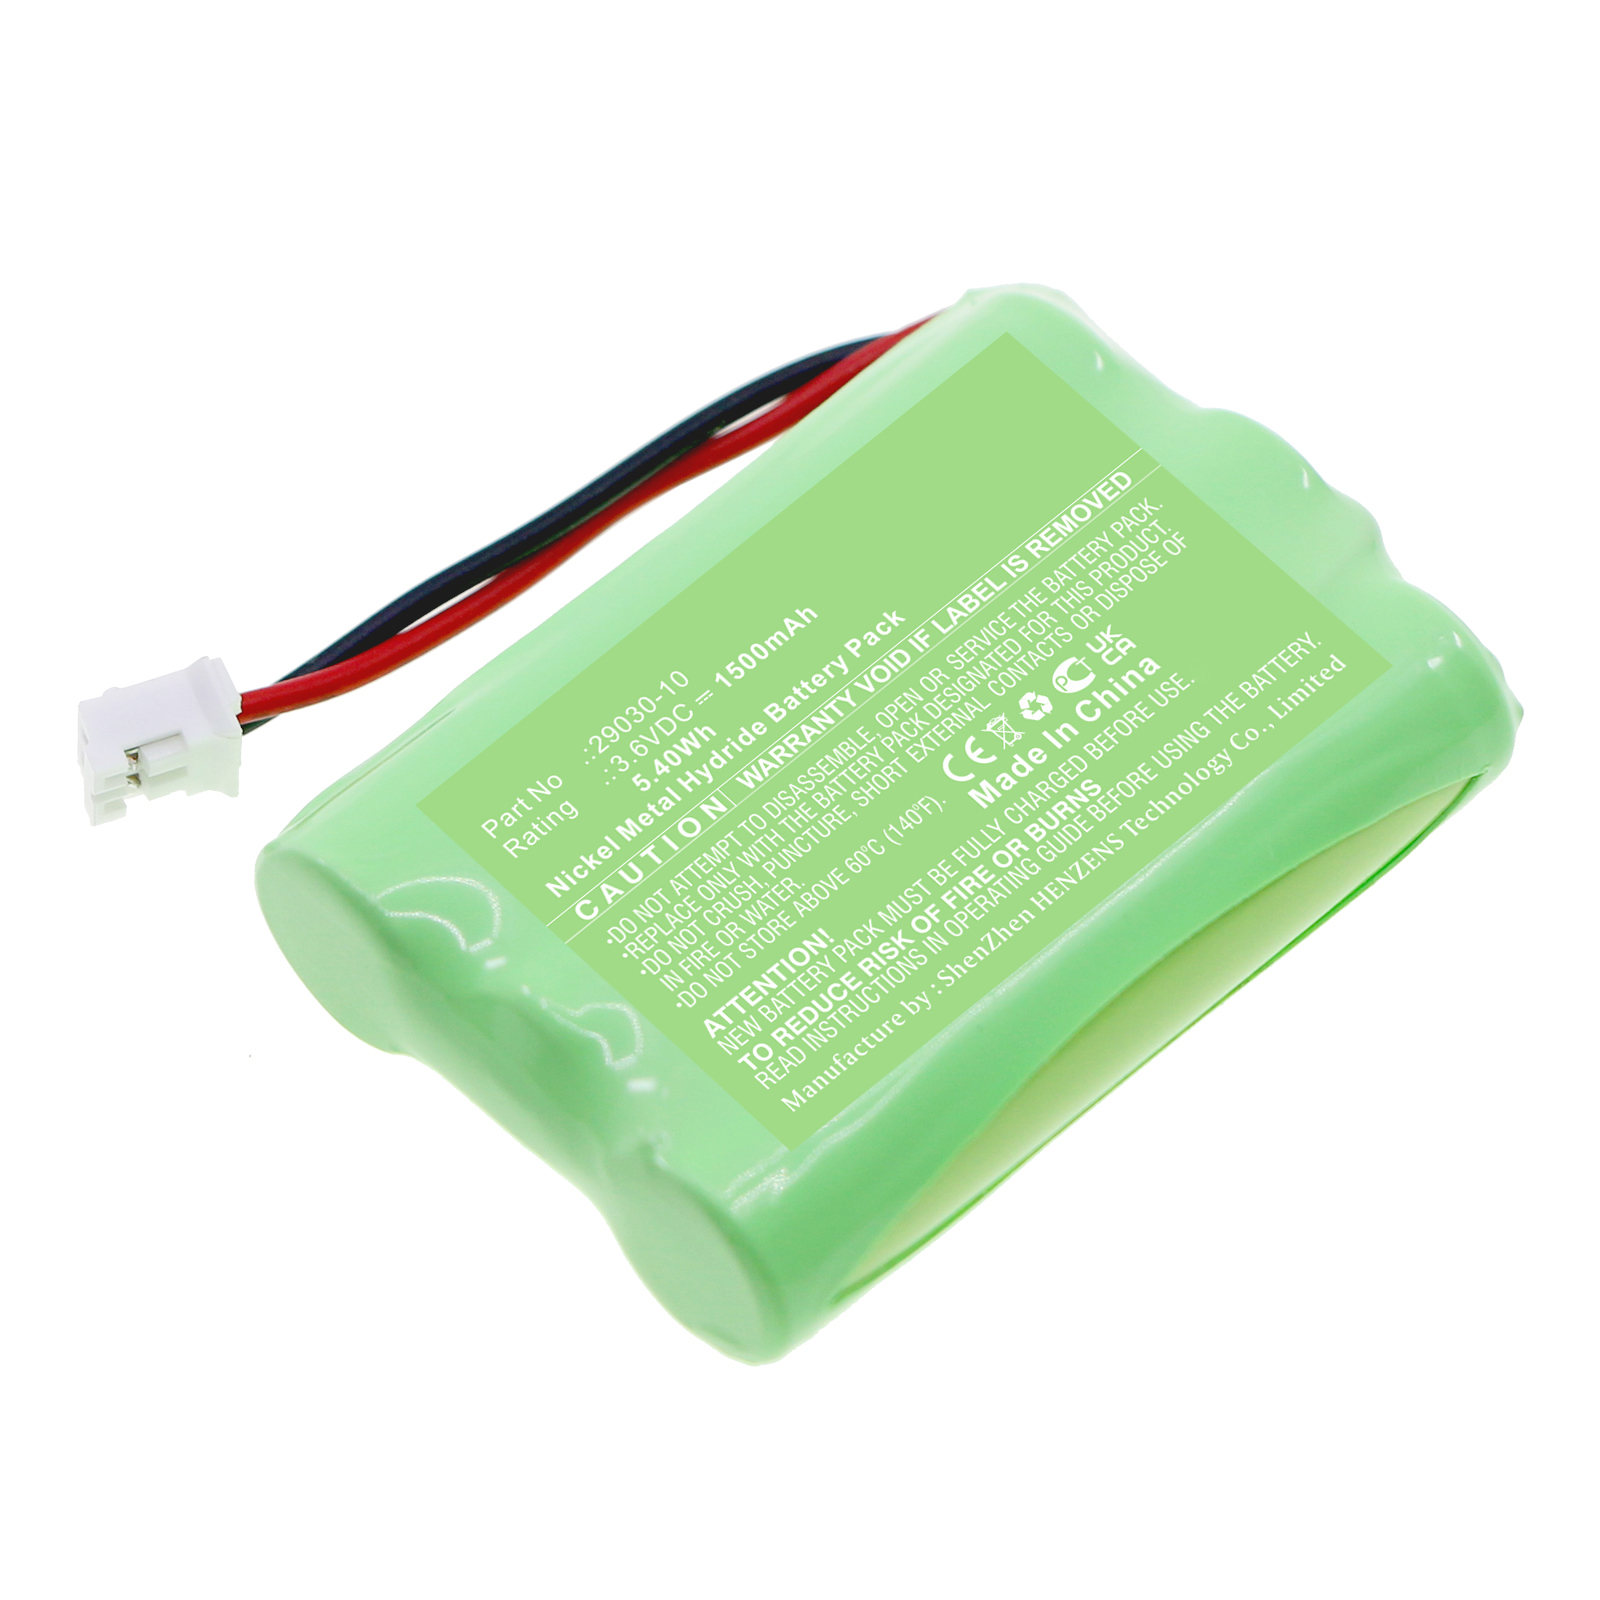 Synergy Digital Baby Monitor Battery, Compatible with Summer 29580-10 Baby Monitor Battery (Ni-MH, 4.8V, 1000mAh)